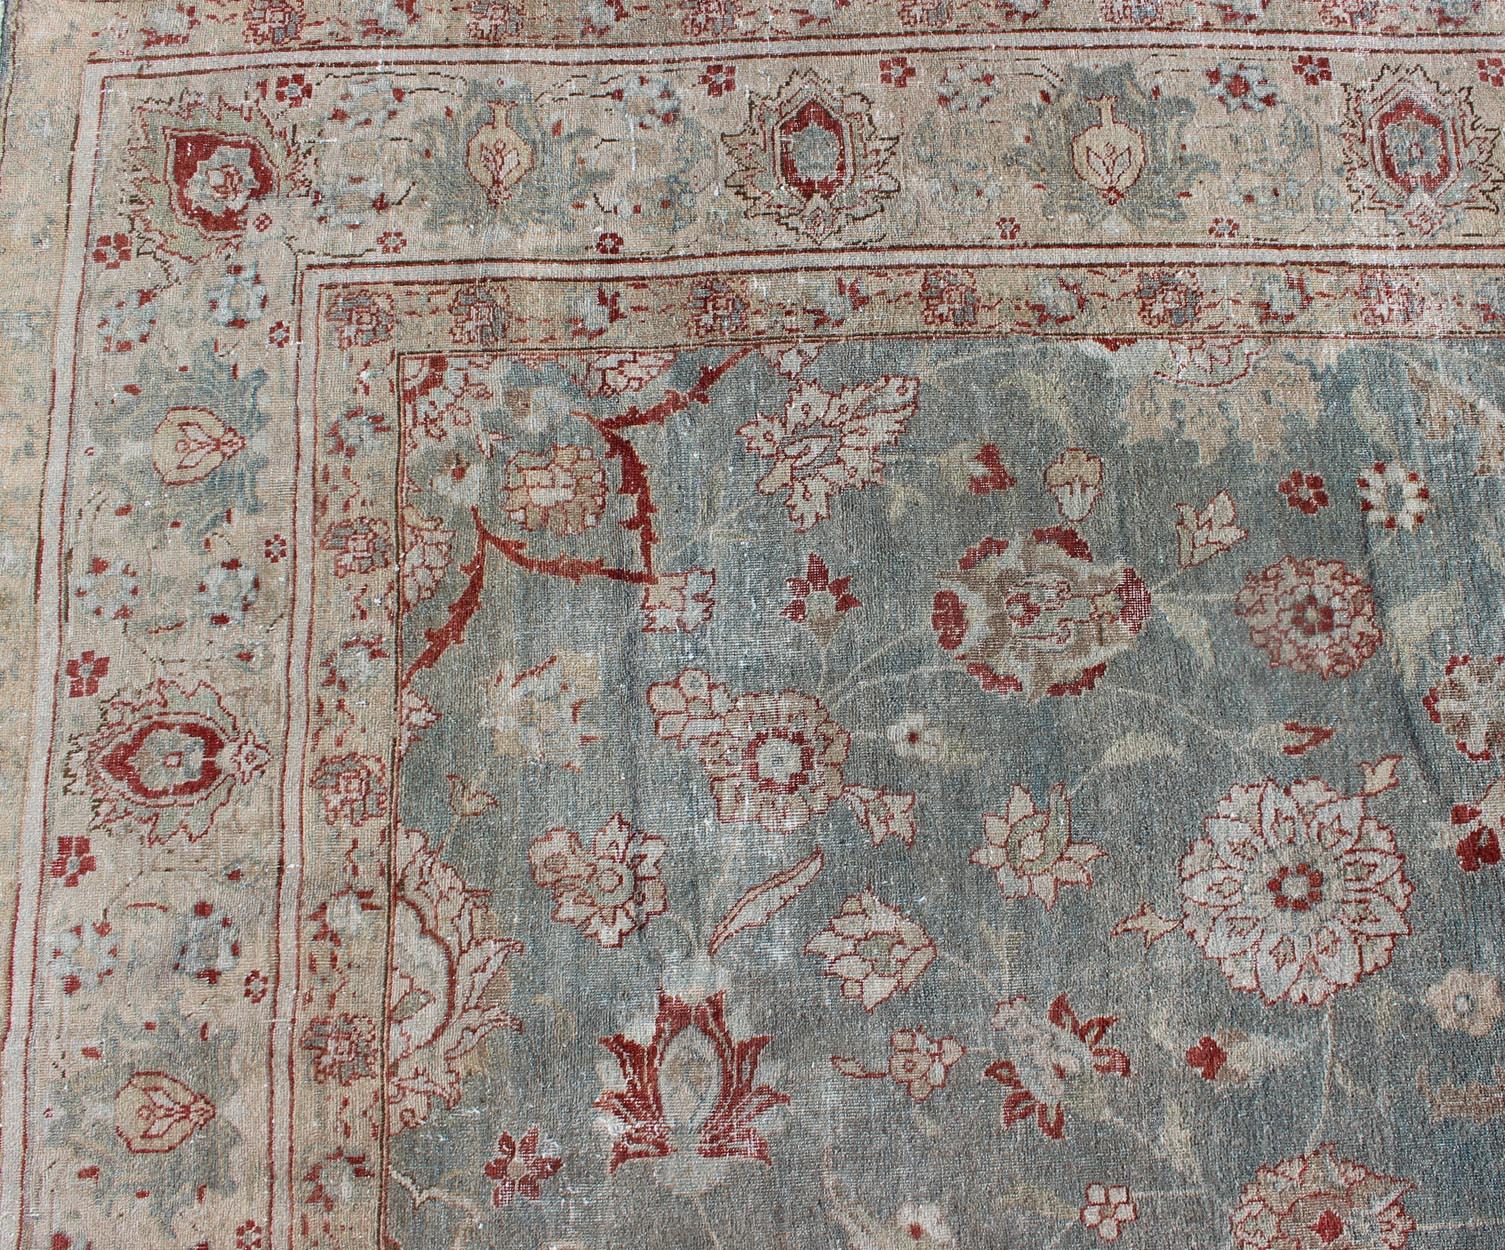 Early 20th Century Antique Persian Tabriz Rug with Floral Medallion Design in Red and Blue For Sale